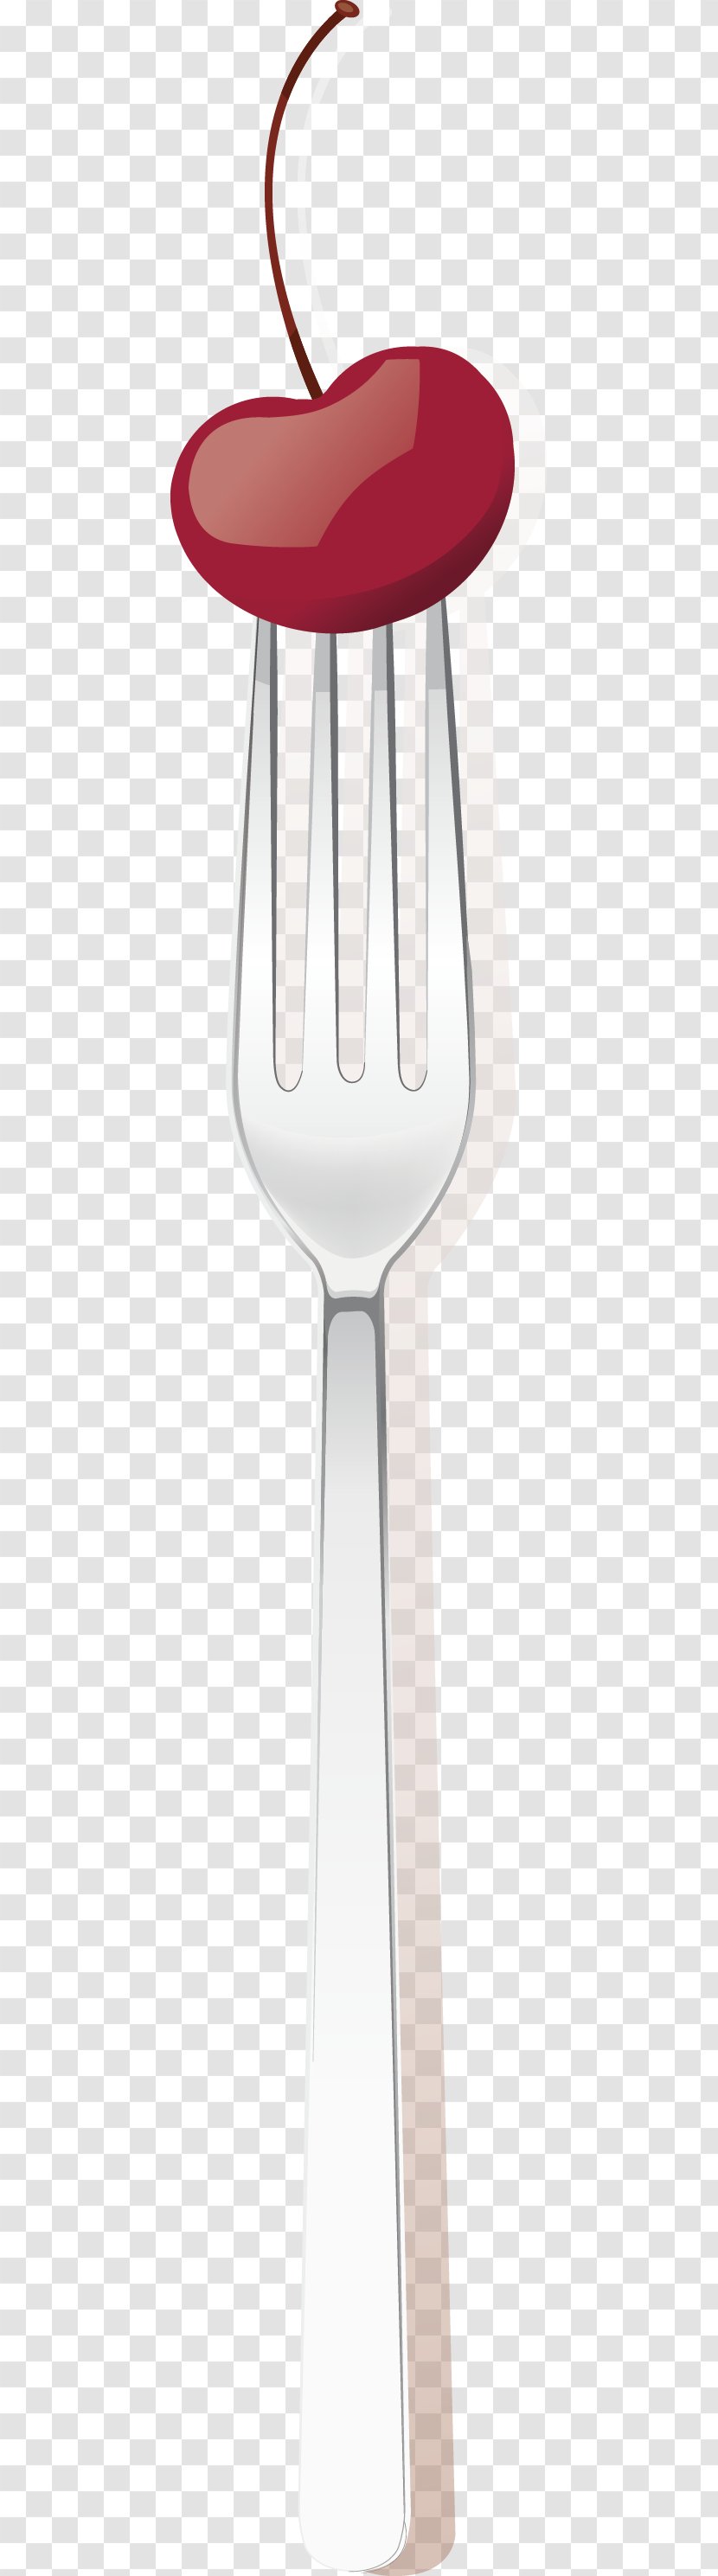 Fork Spoon Illustration - Red - Cherry Fruit Knife And Vector Transparent PNG